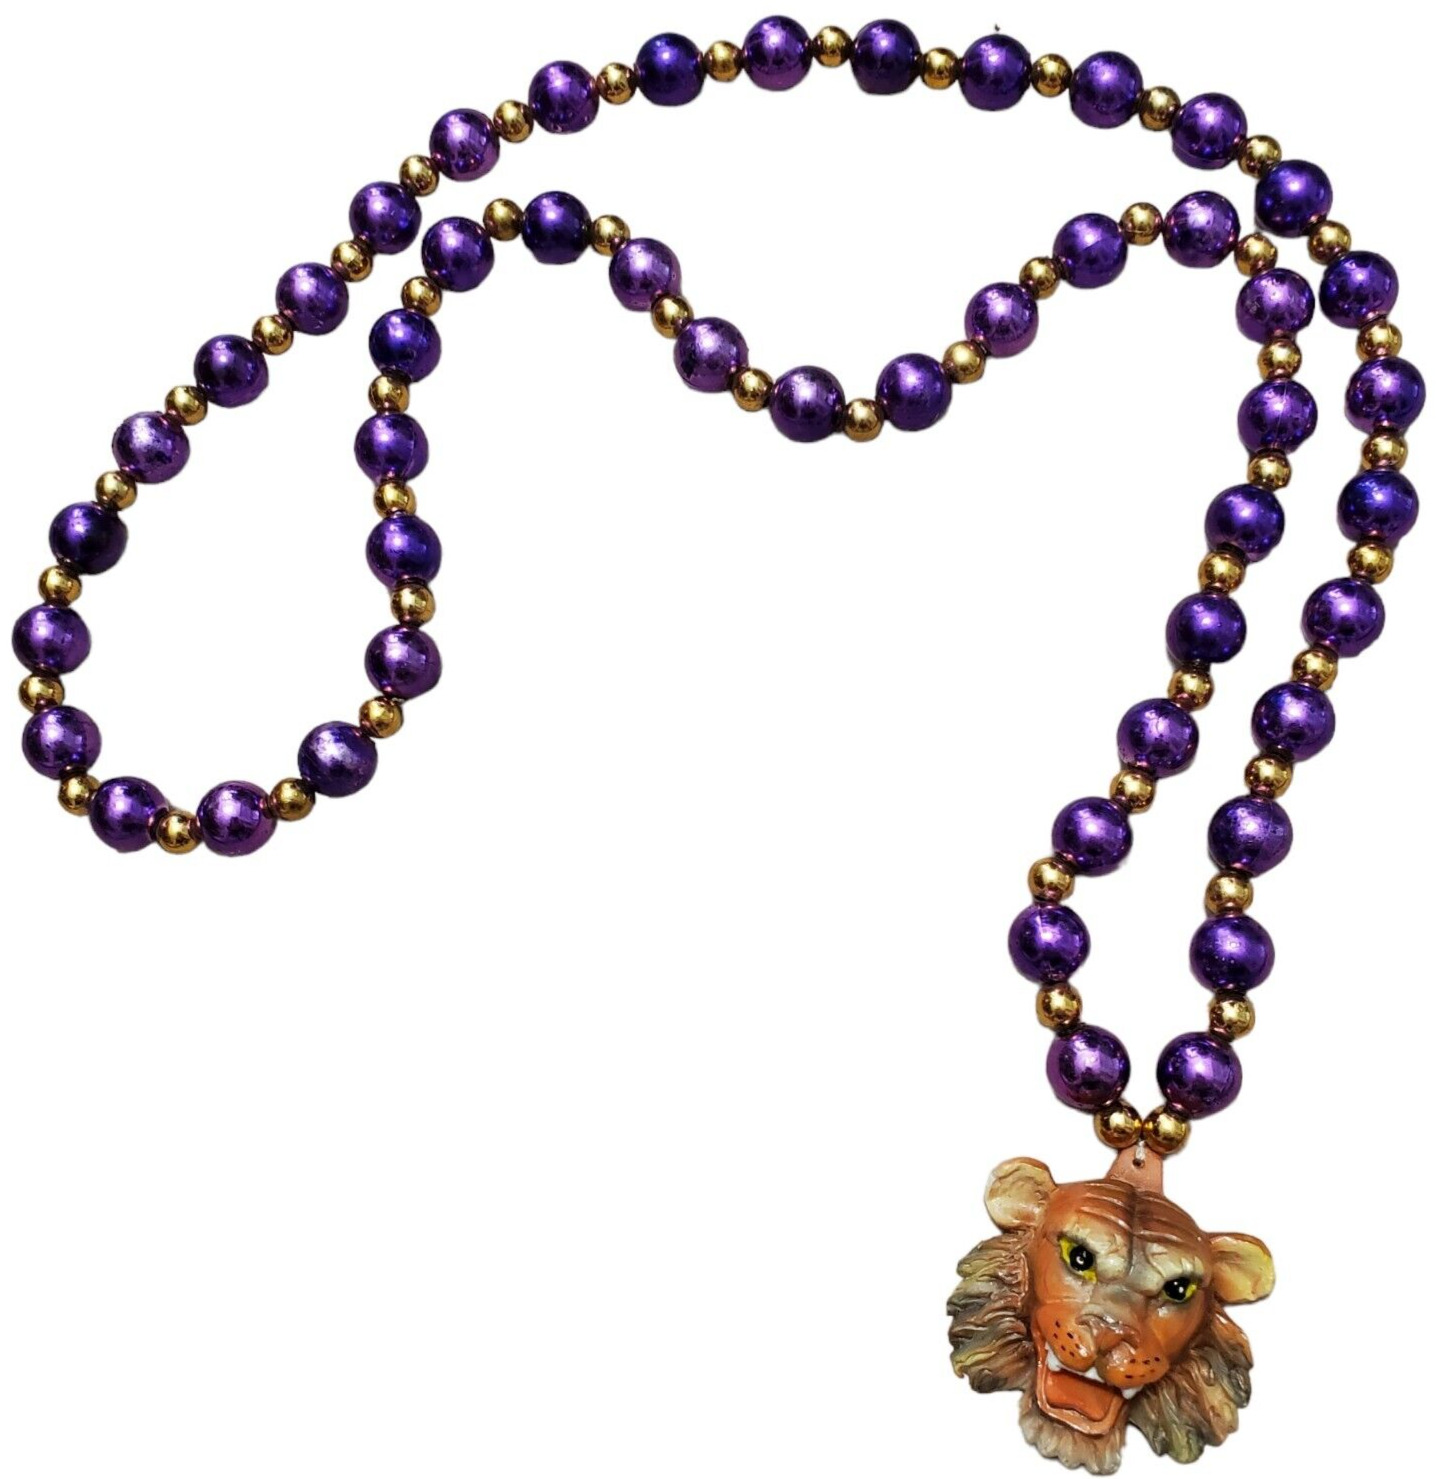 LSU FIGHTING TIGERS PURPLE & GOLD TIGER NECKLACE BEADS